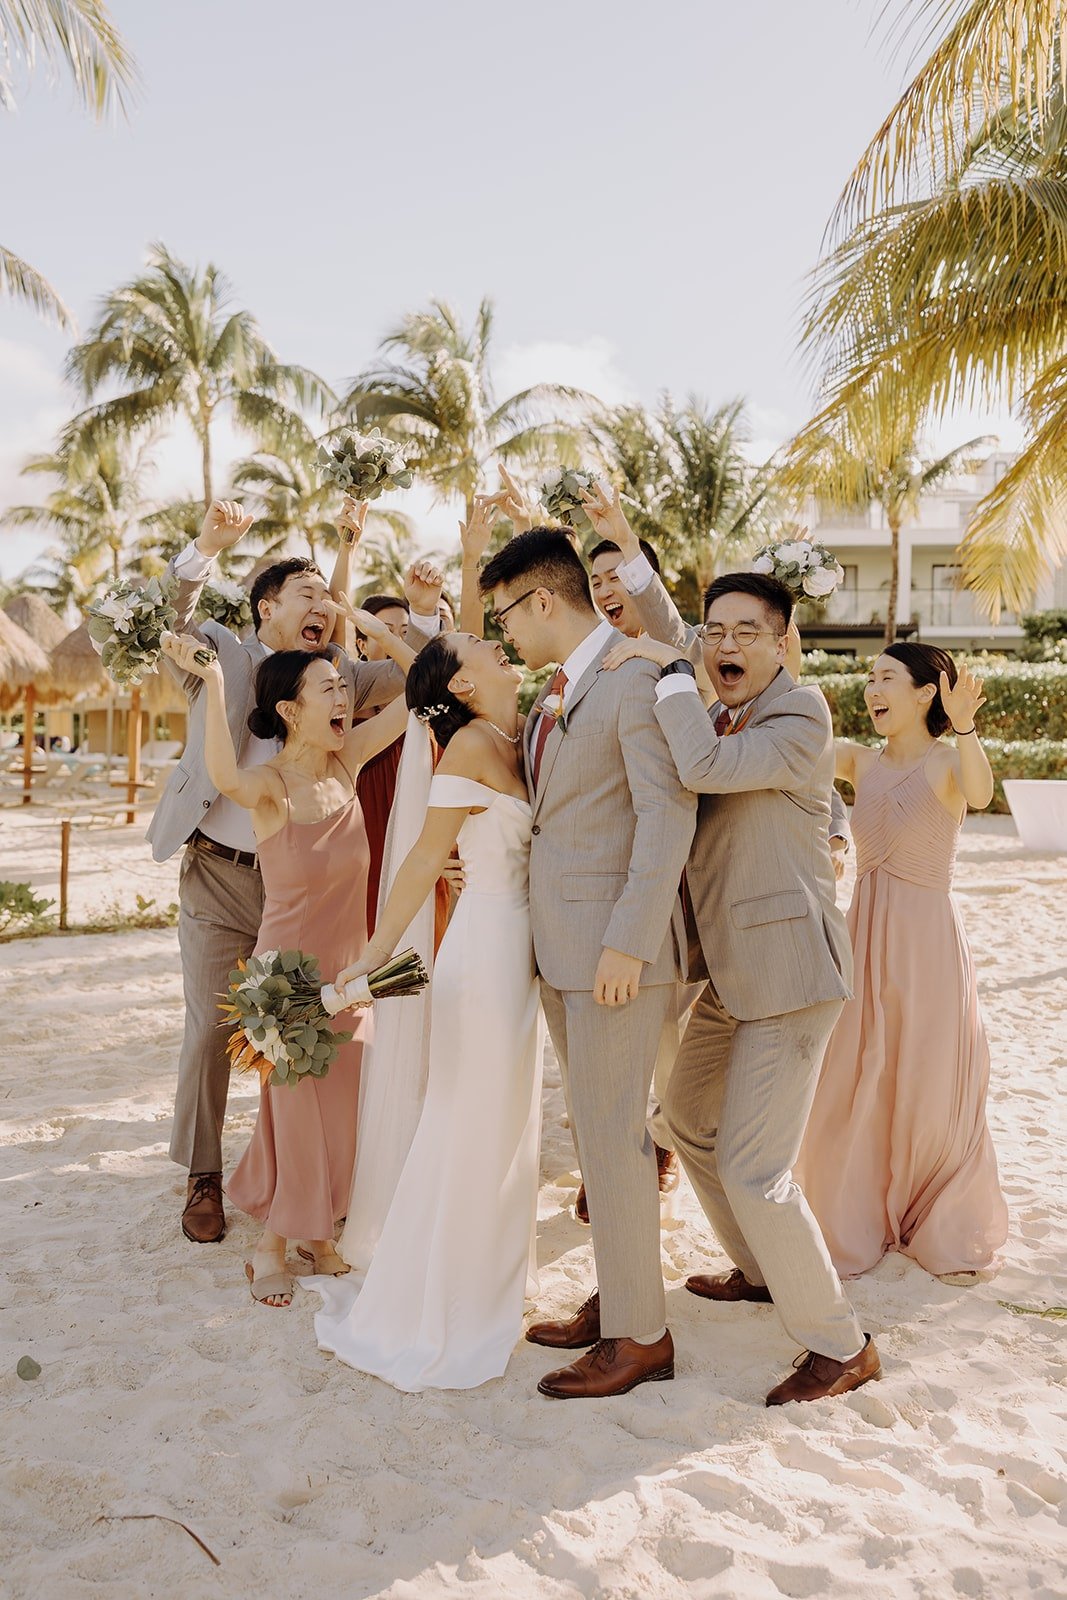 Bride and groom kiss while their wedding party celebrates in the background at their destination wedding in Mexico